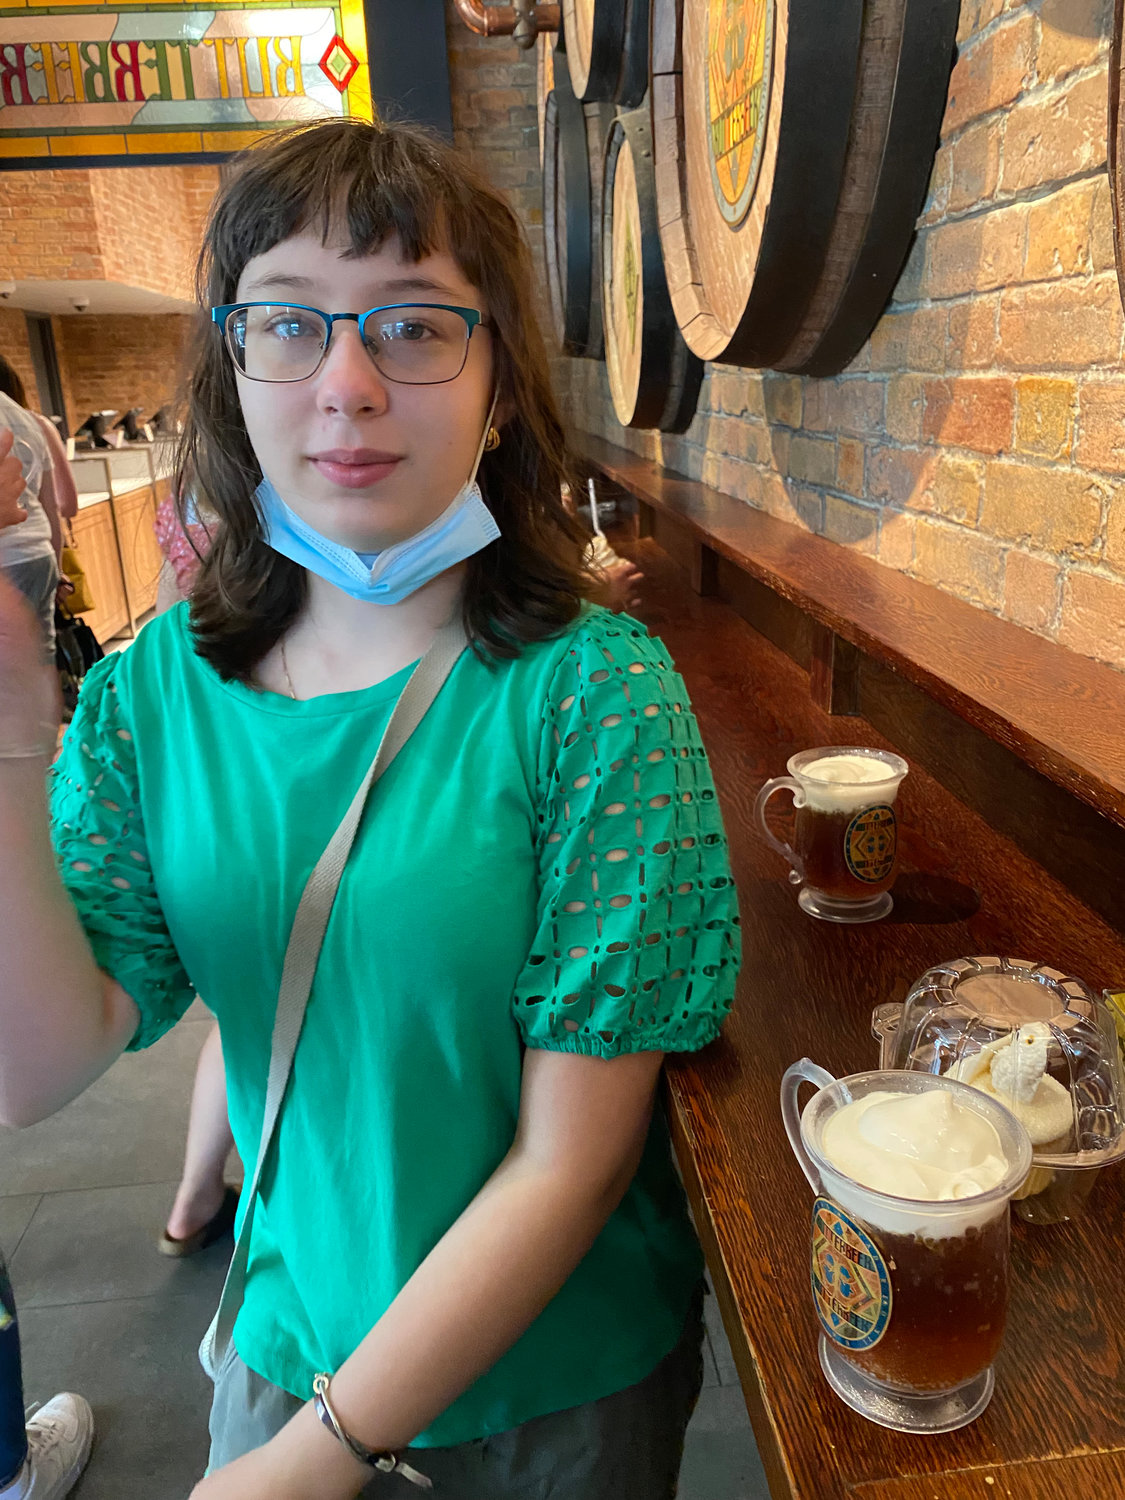 Anna Tikhomirova next to the Butterbeer at the new Harry Potter store in Manhattan.